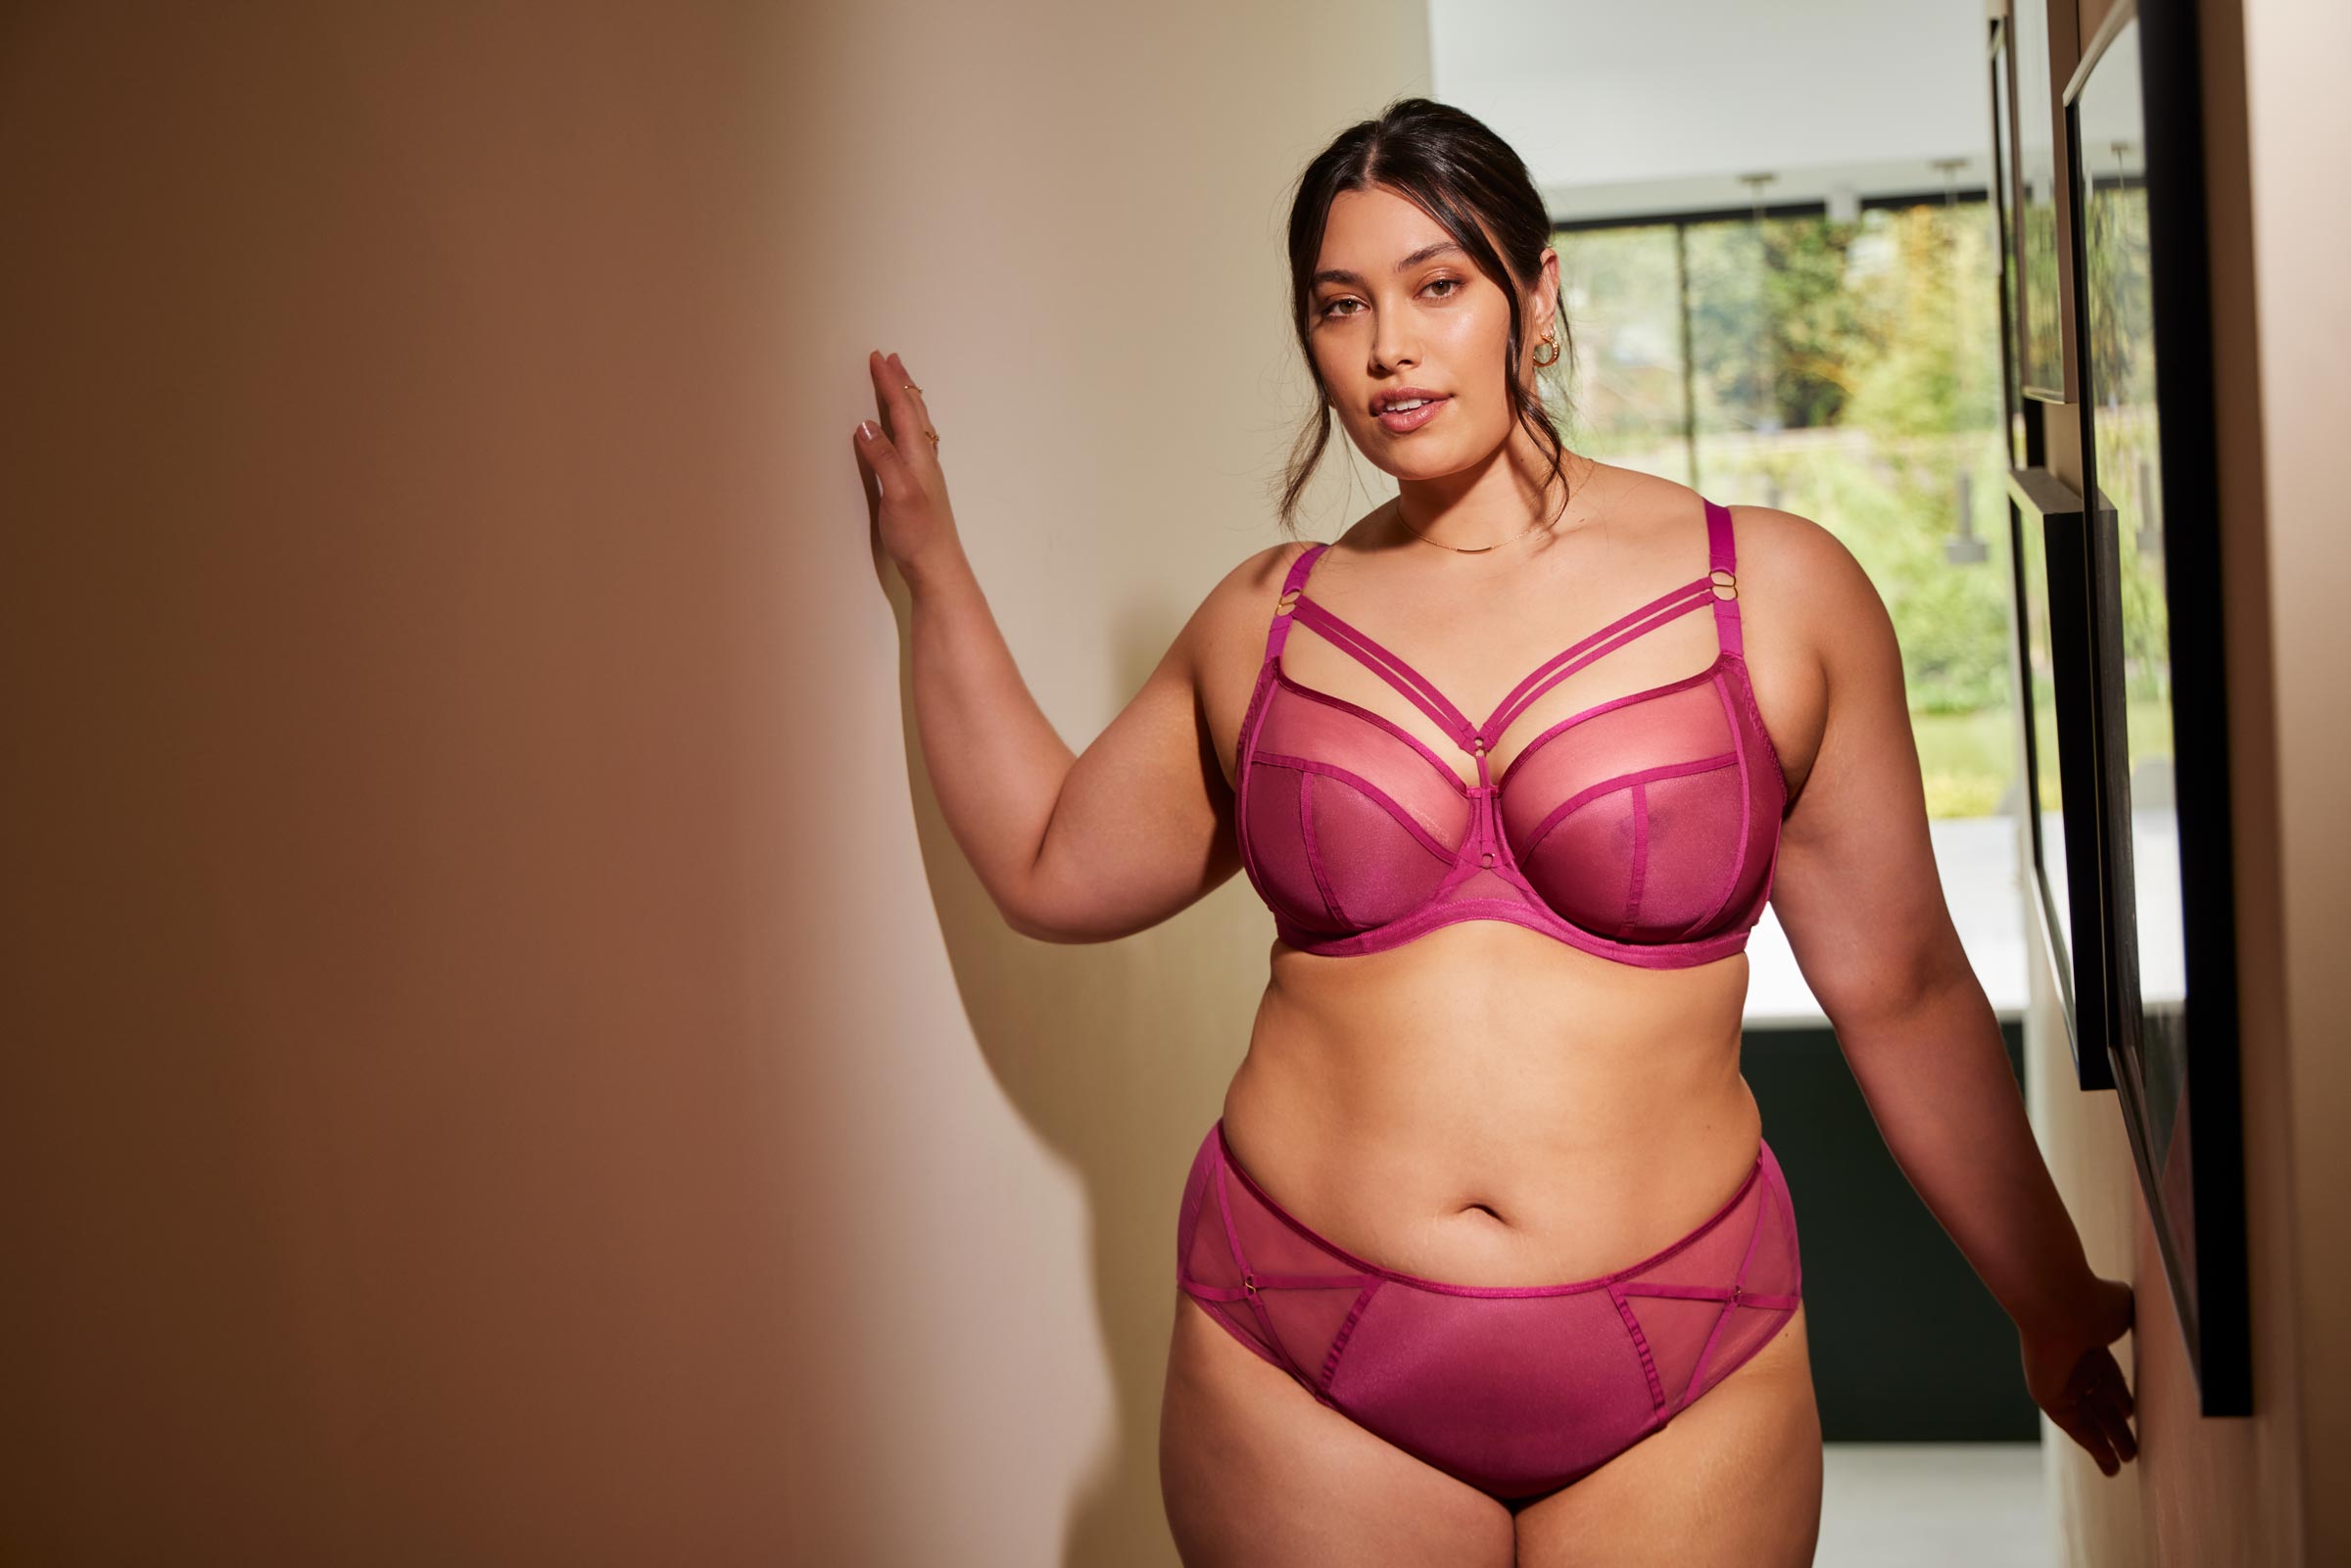 bryant humphrey recommends huge tits lingerie pic